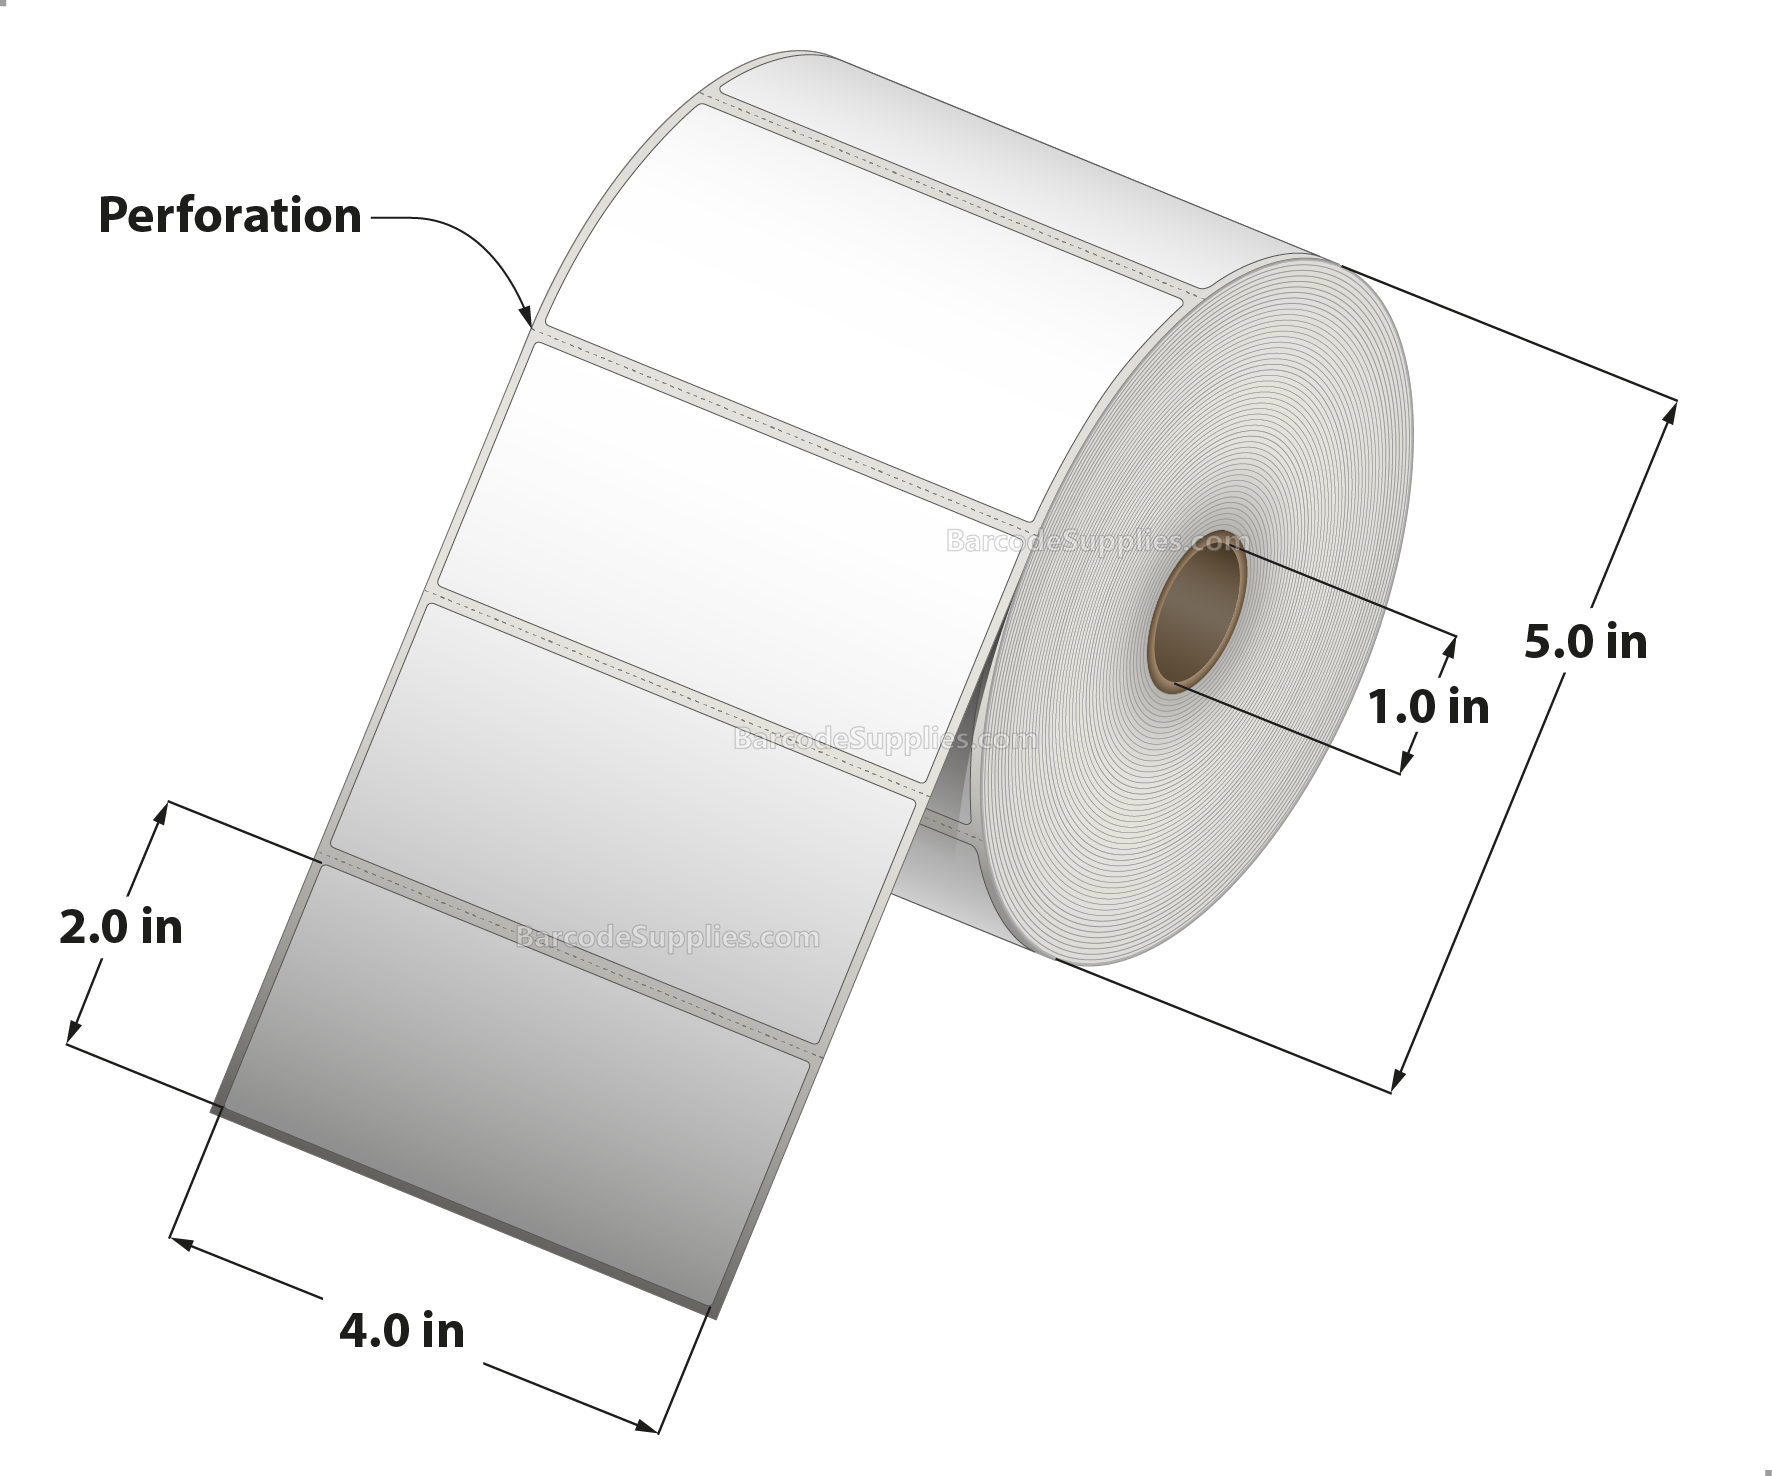 4 x 2 Direct Thermal White Labels With Rubber Adhesive - Perforated - 1240 Labels Per Roll - Carton Of 12 Rolls - 14880 Labels Total - MPN: RDT5-400200-1P